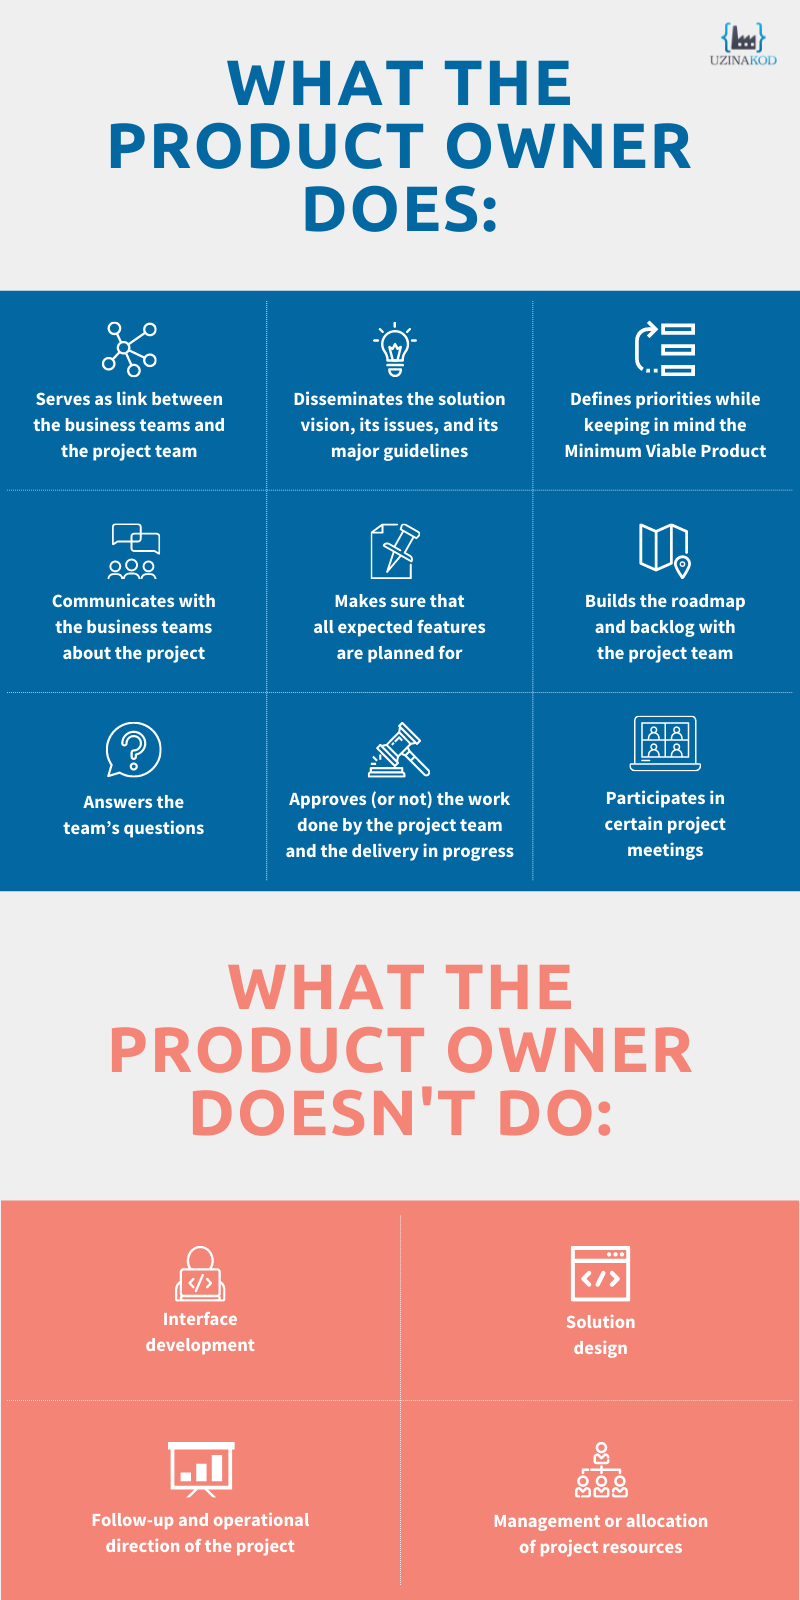 Infographic: What the Product Owner does and doesn't do